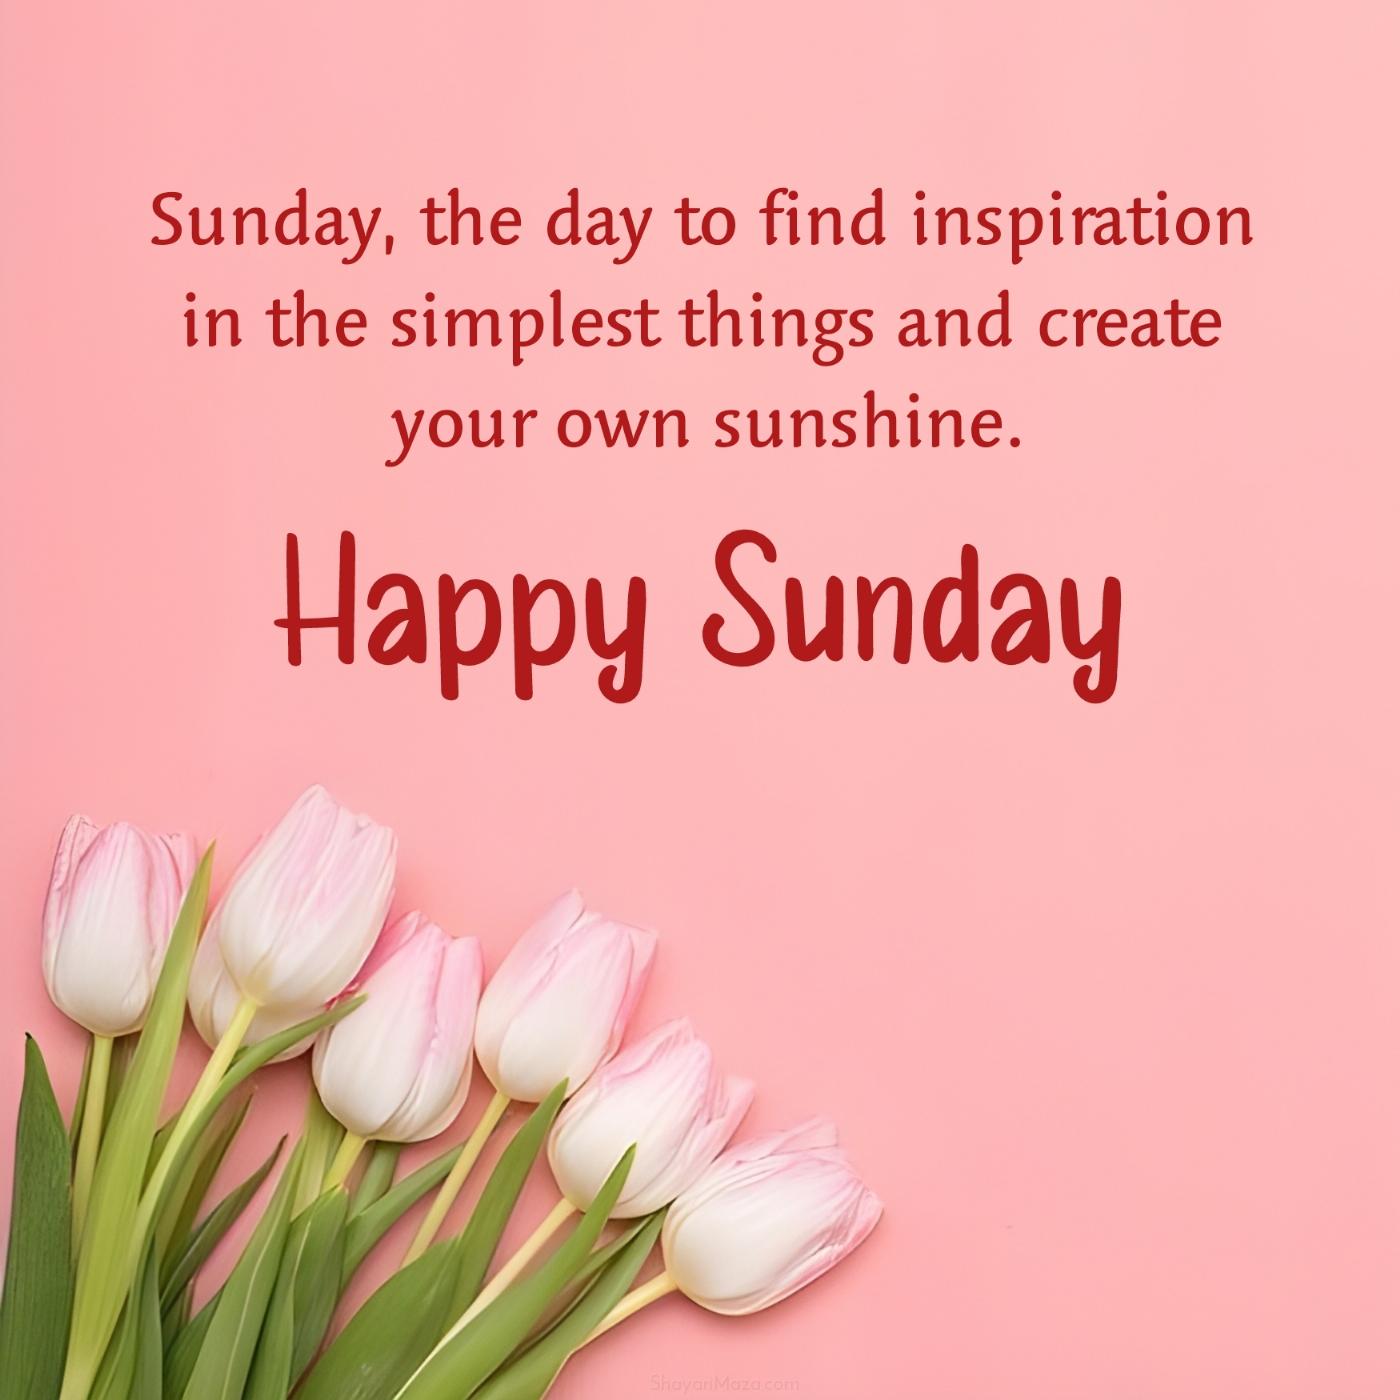 Sunday the day to find inspiration in the simplest things